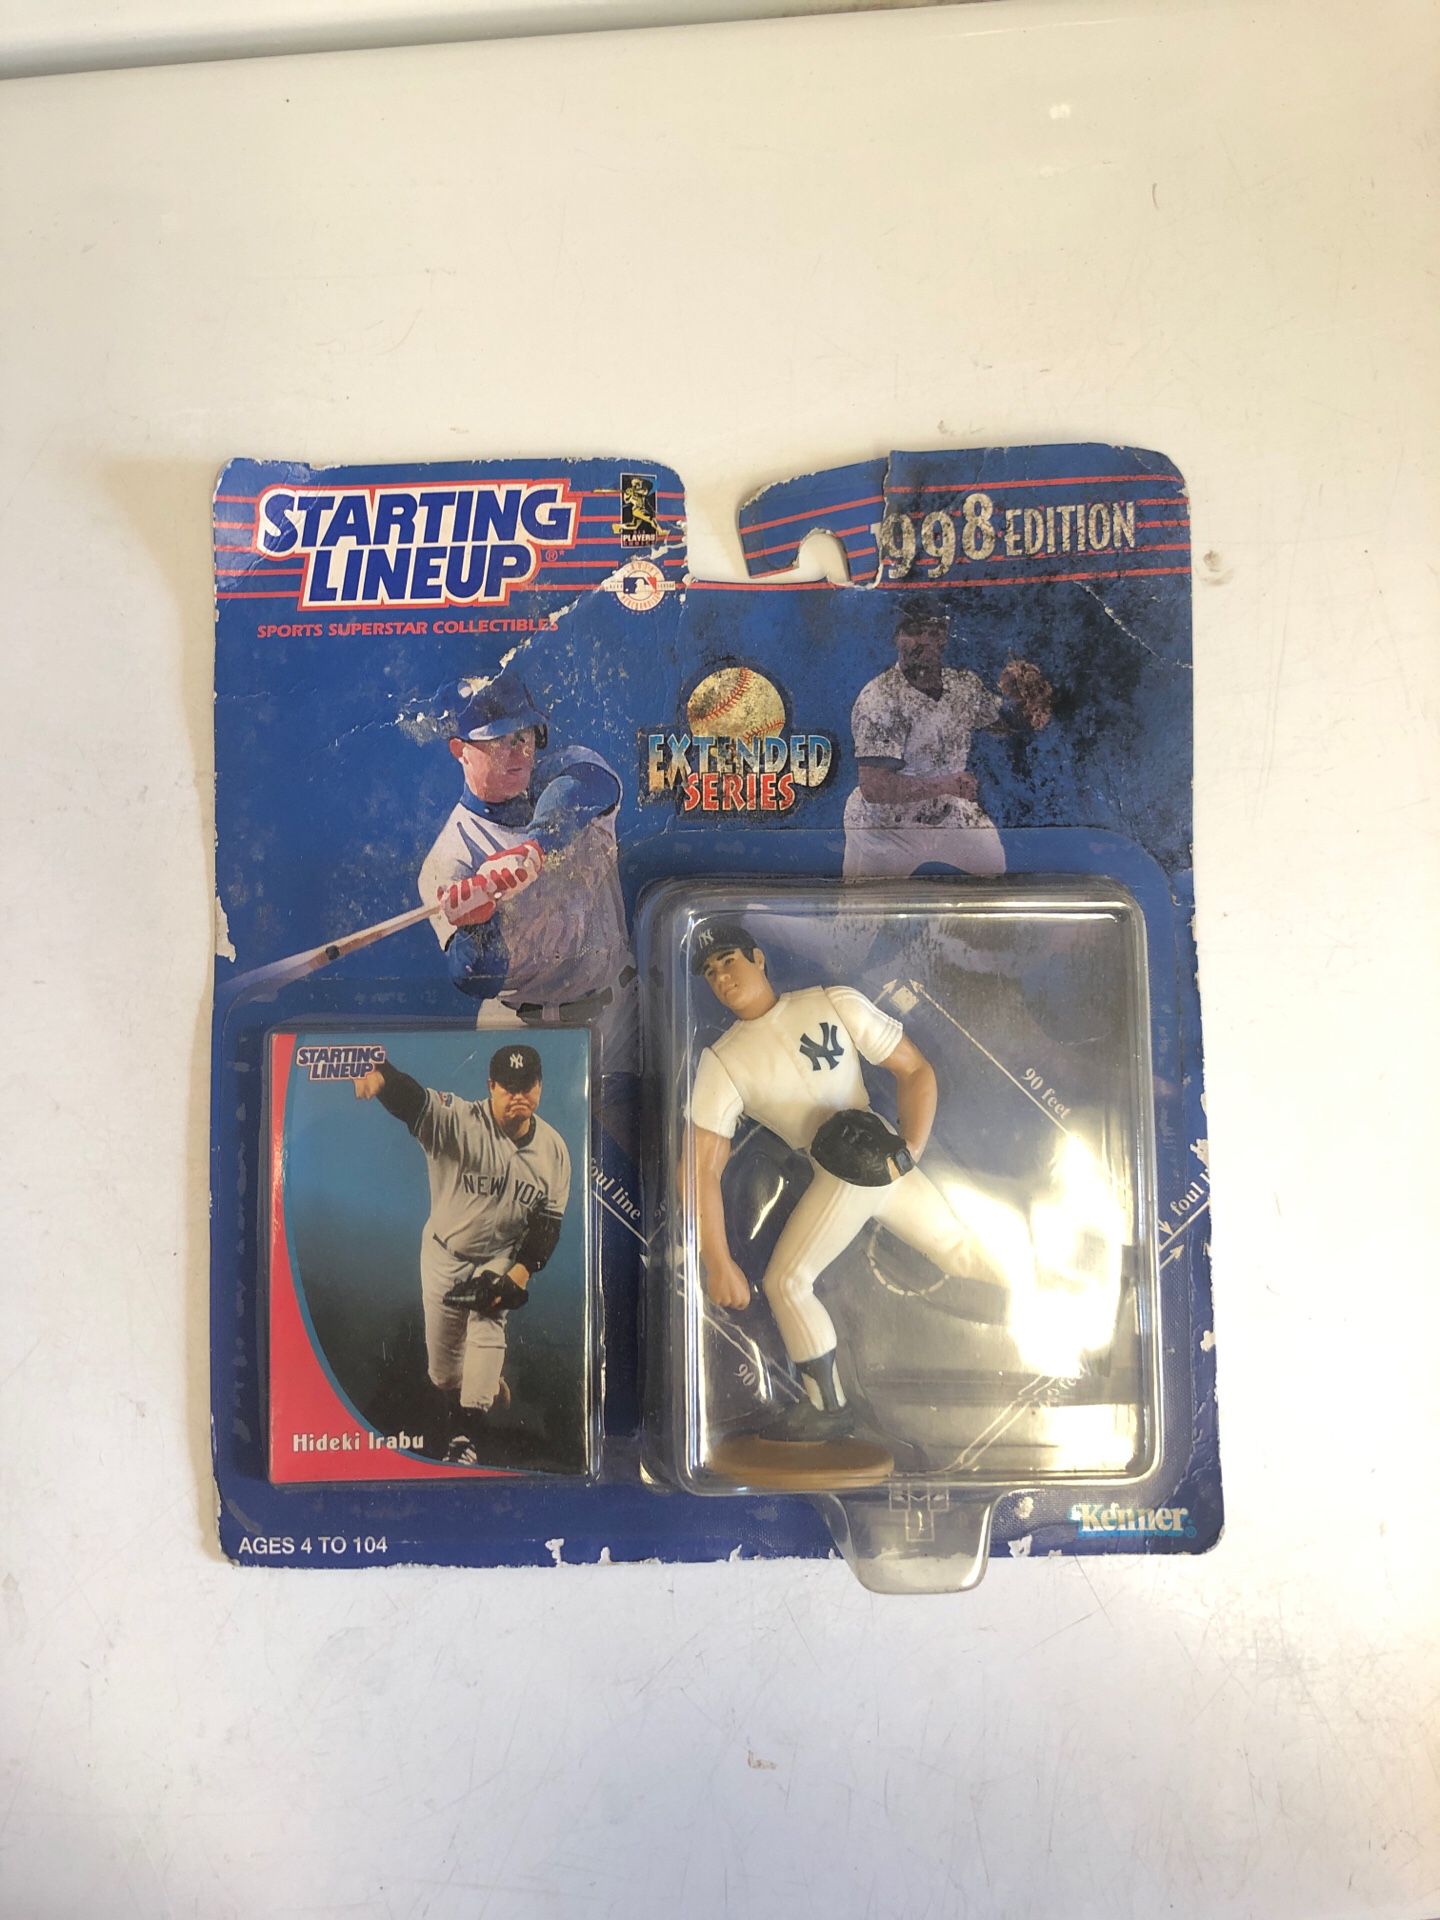 Sports action figures collectibles